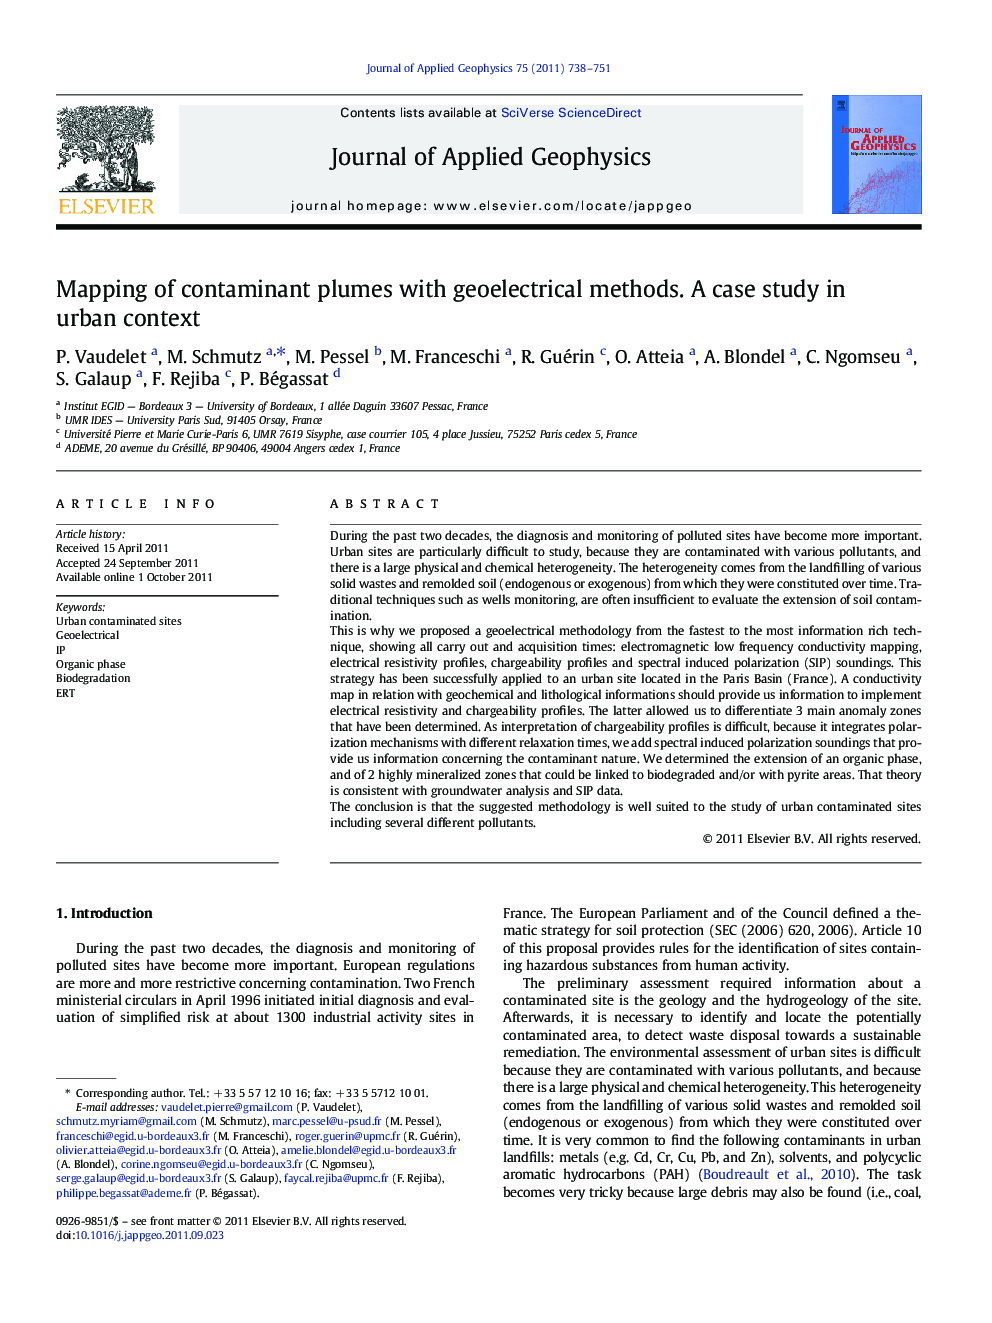 Mapping of contaminant plumes with geoelectrical methods. A case study in urban context